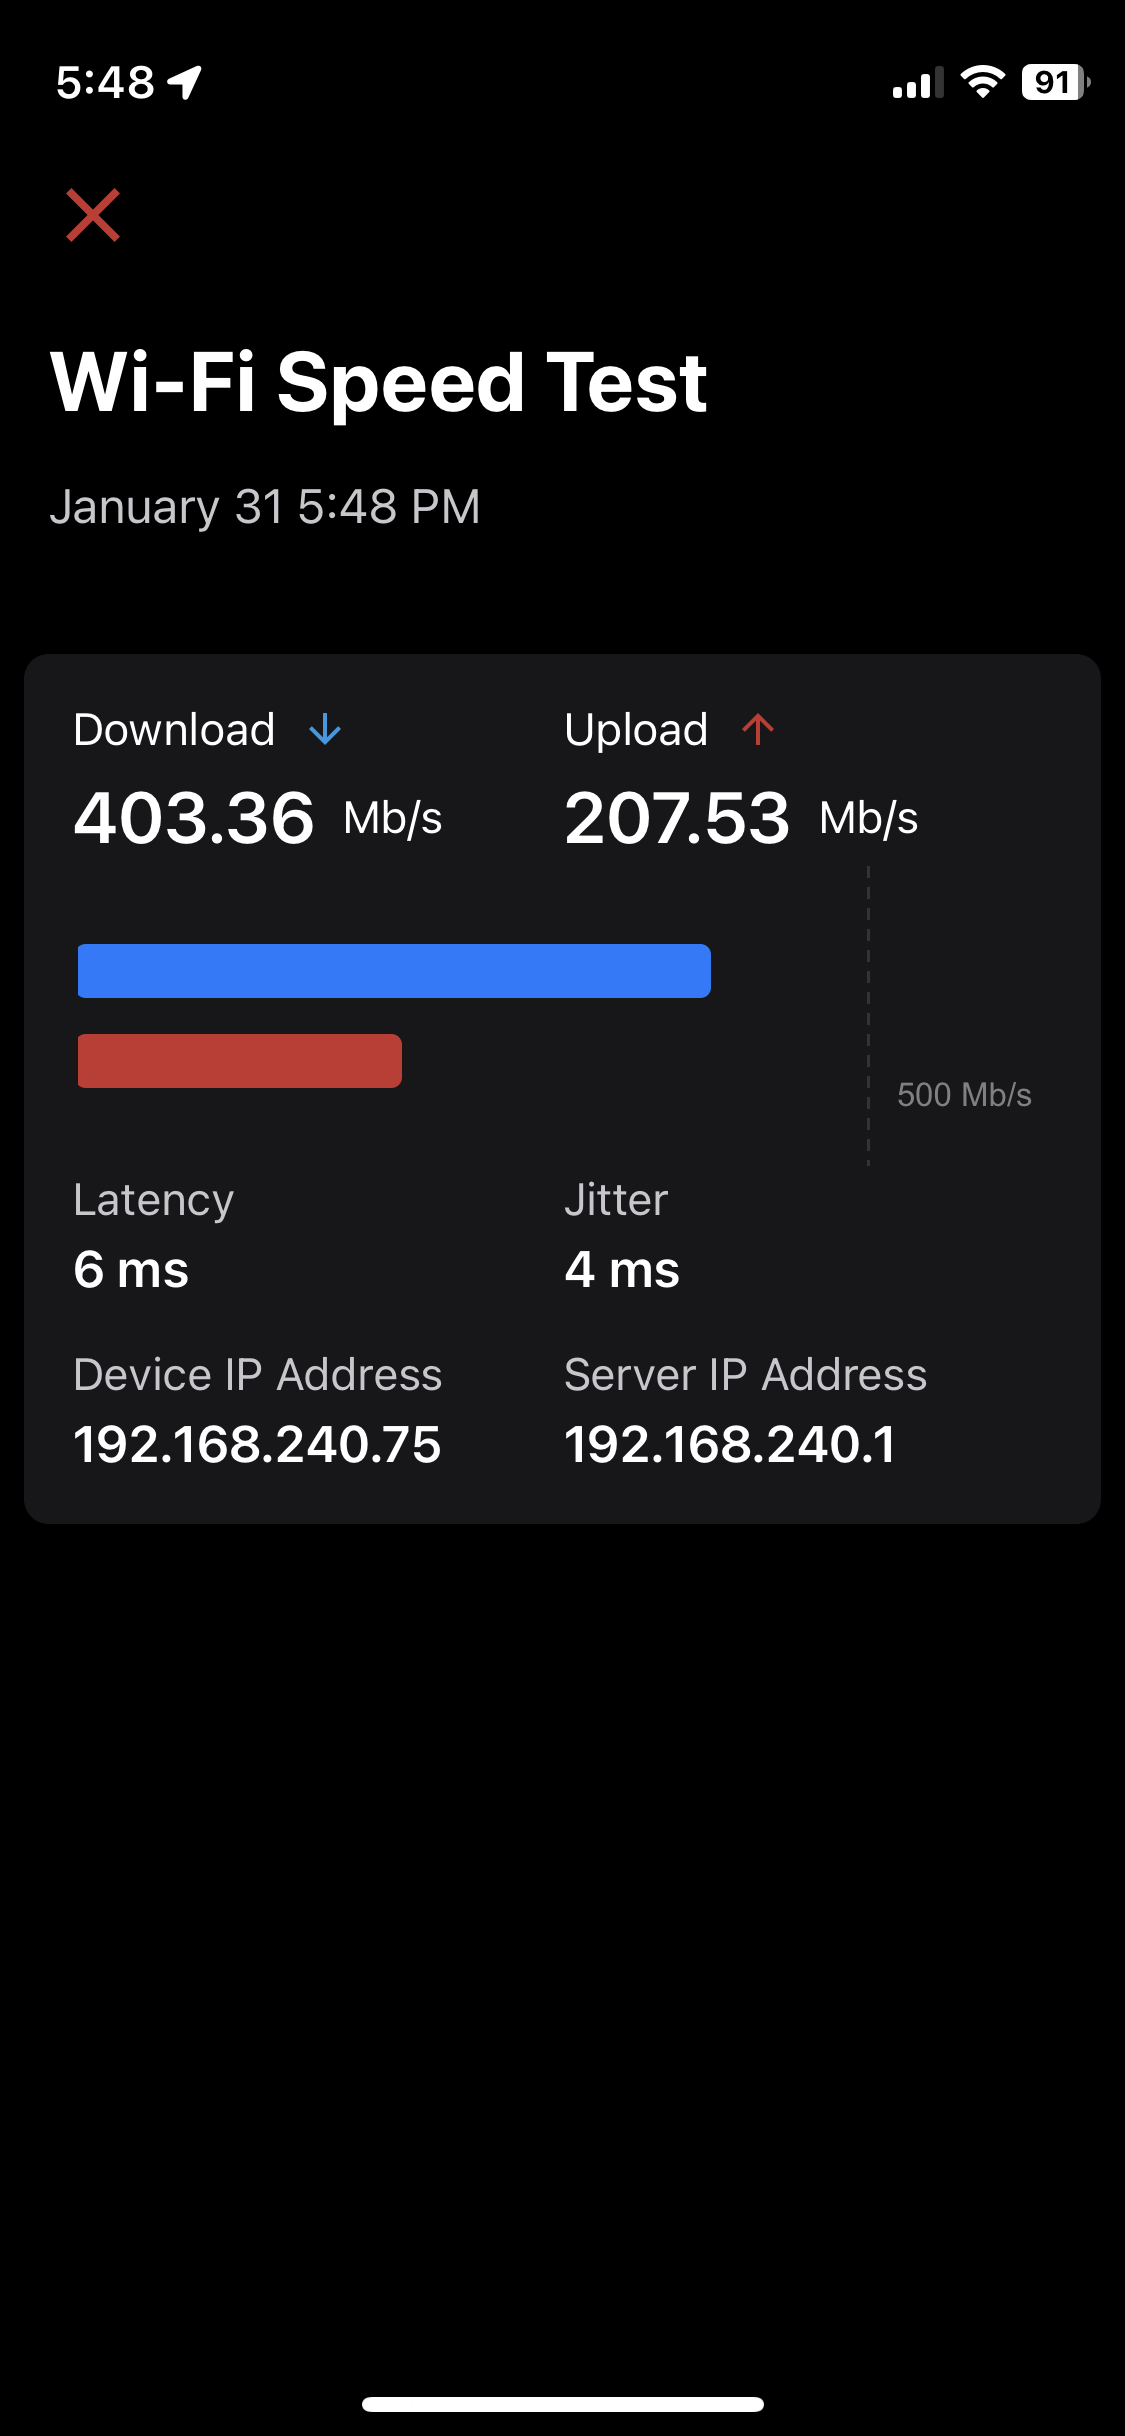 Speed test completed displays consistent upload and download speed with a bar graph visual.